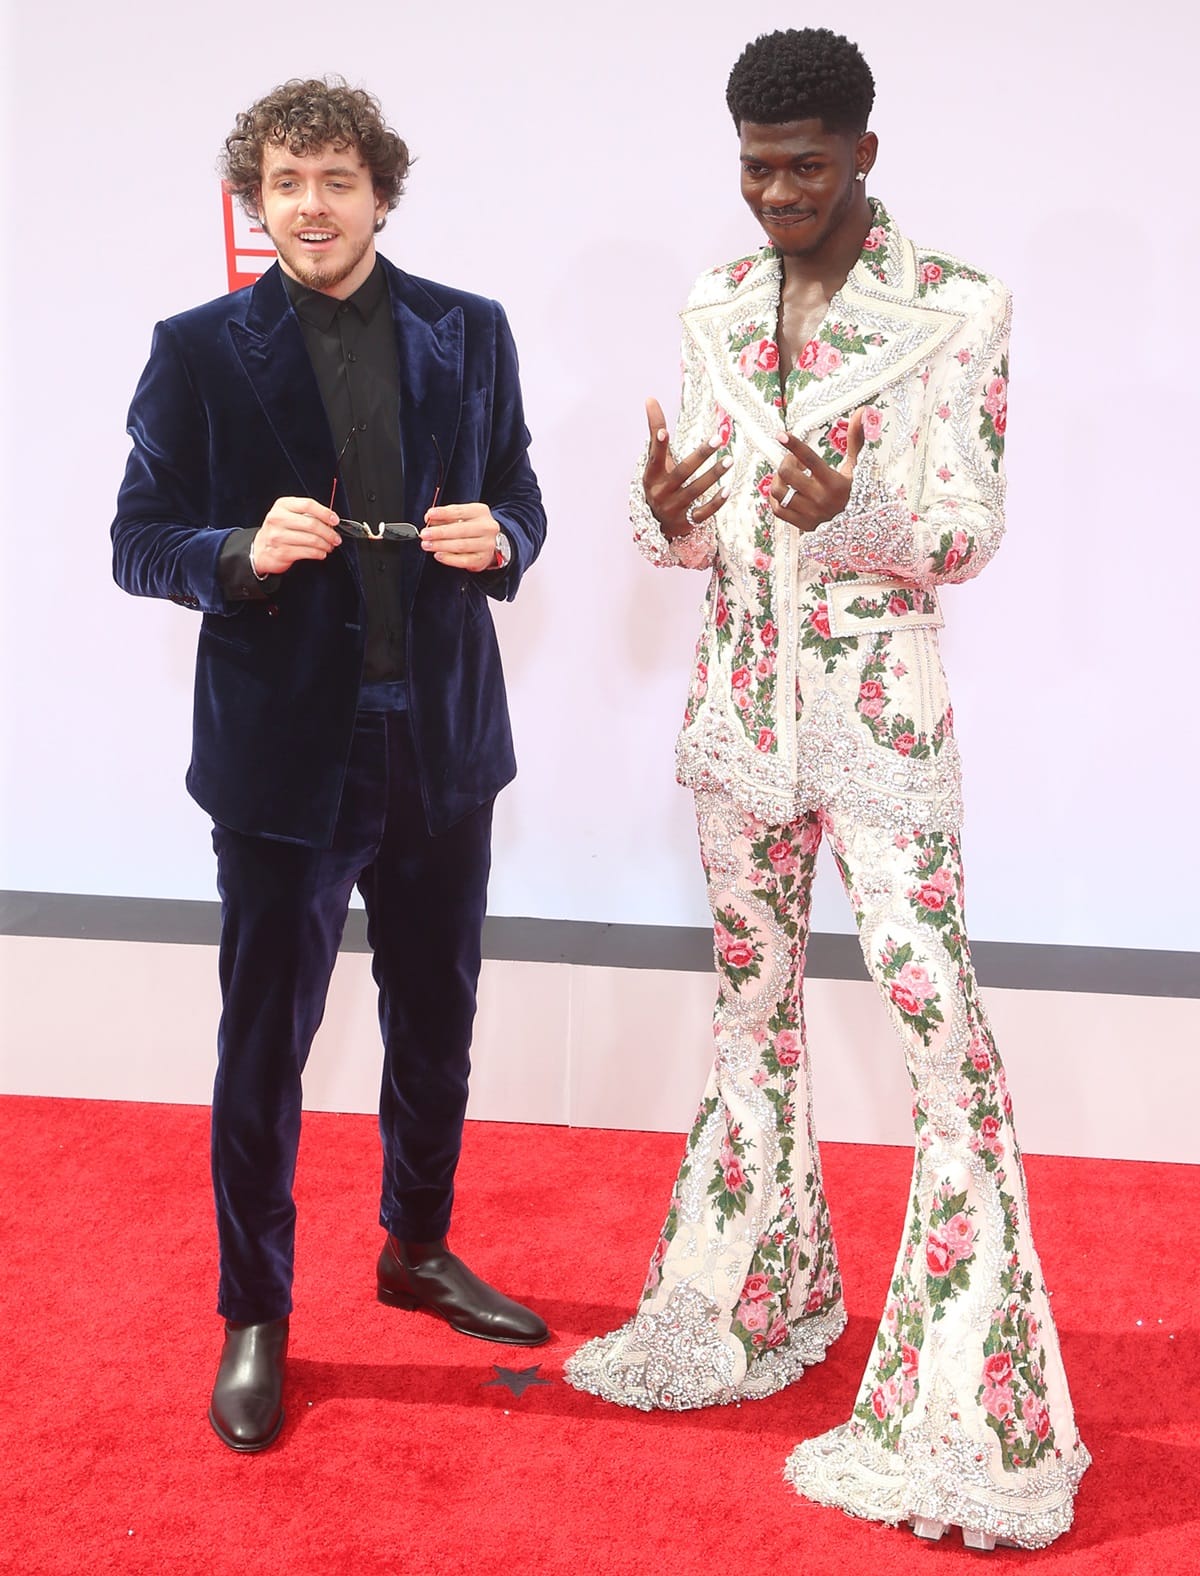 Jack Harlow is slightly taller than Lil Nas X by approximately 0.75 inches (1.9 cm), with Jack Harlow's height being 6ft 2 ¼ (188.6 cm) and Lil Nas X's height being 6ft 1 ½ (186.7 cm)